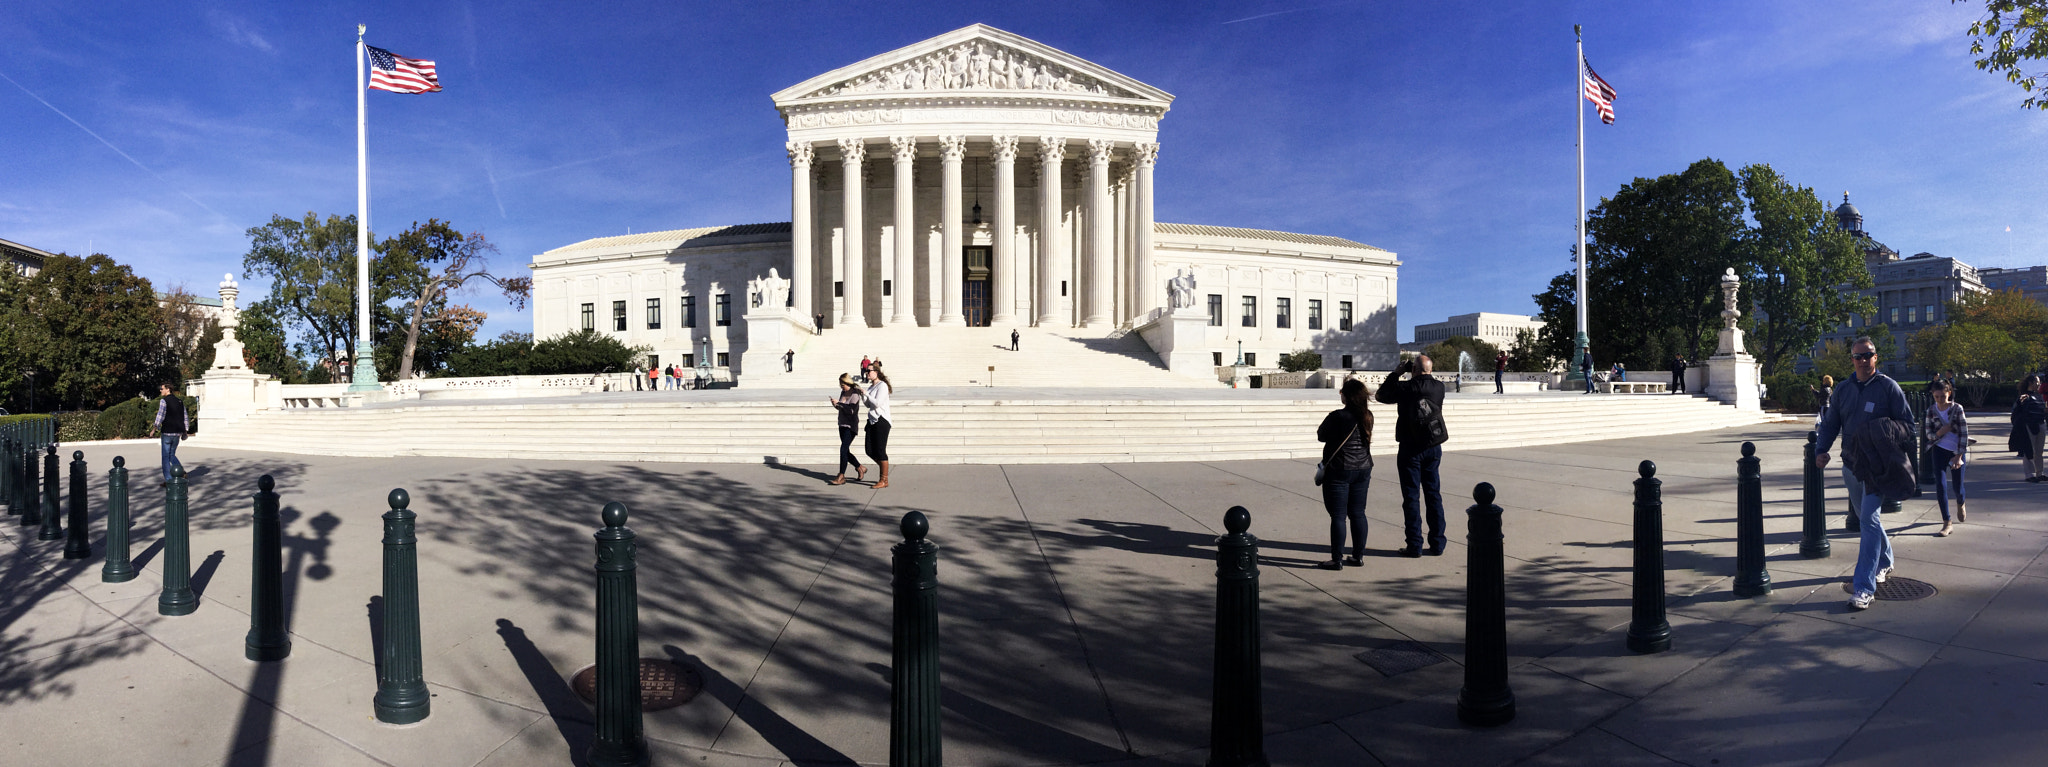 Apple iPad Air 2 sample photo. The supreme court building photography